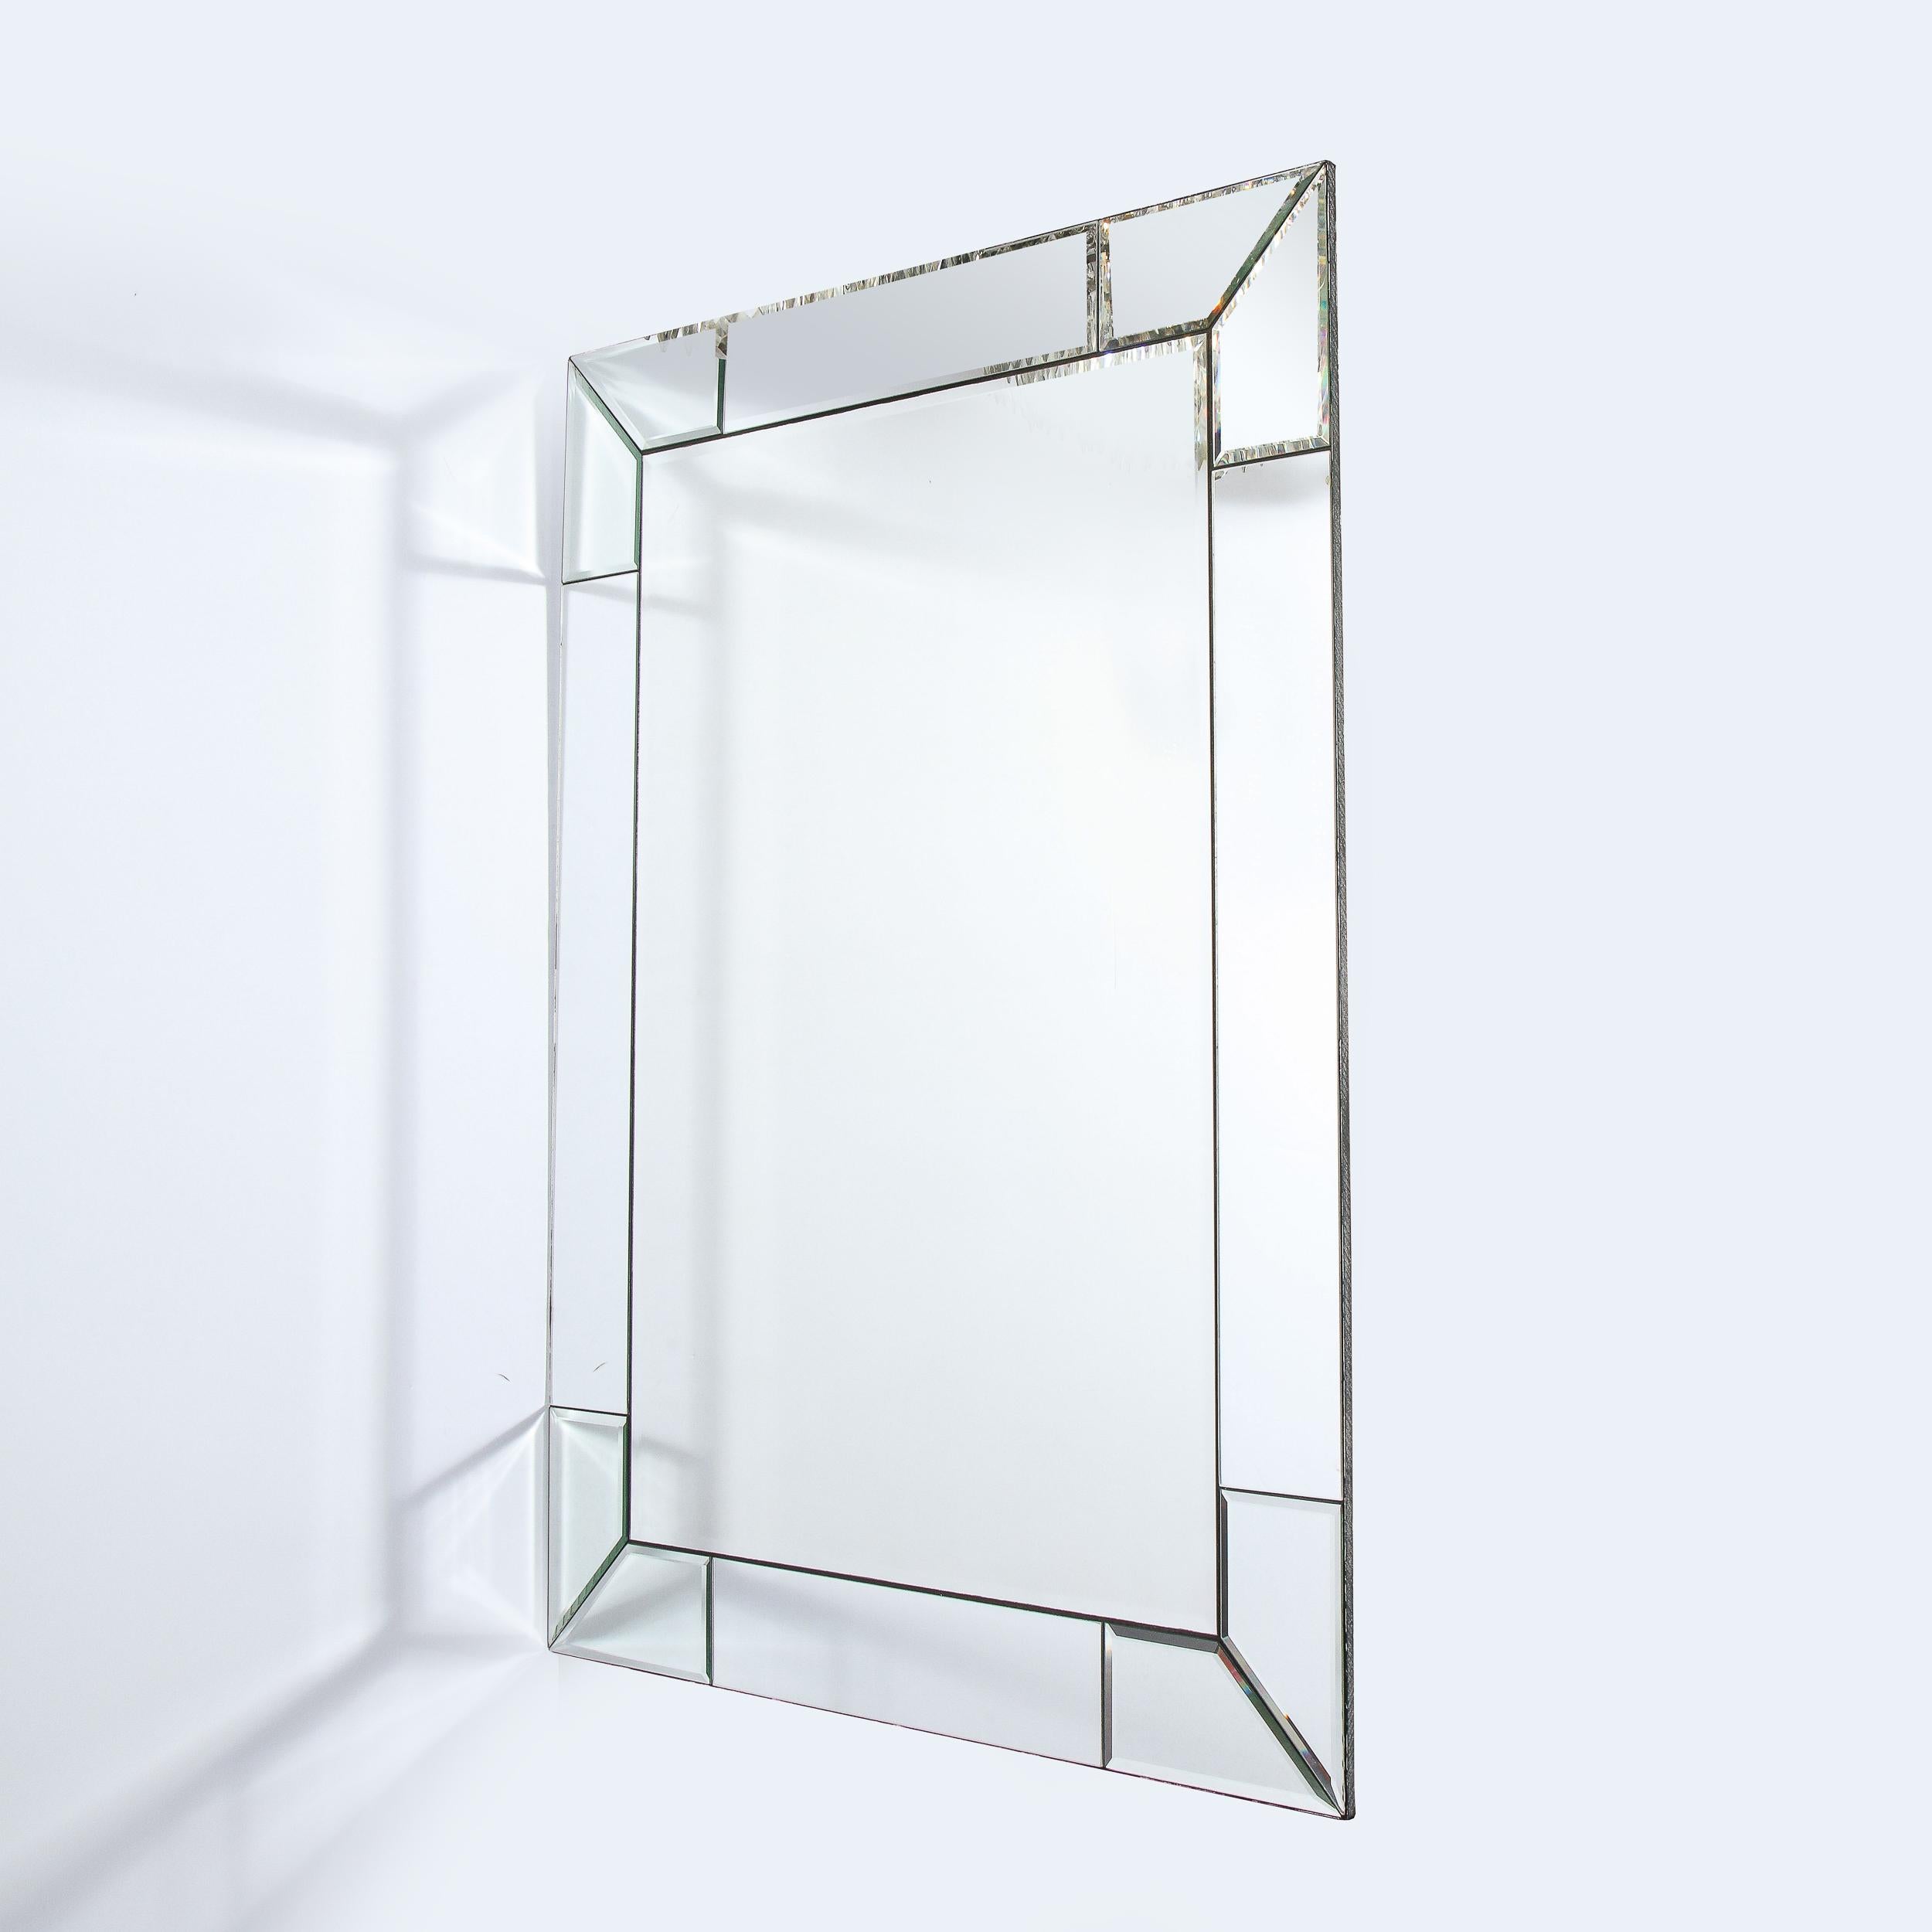 This stunning Custom Modern mirror was realized in the United States, 21st Century. It features a rectangular form with a tessellated border composed of rectilinear mirrored segments with beveled edges that wrap around the perimeter of the piece.